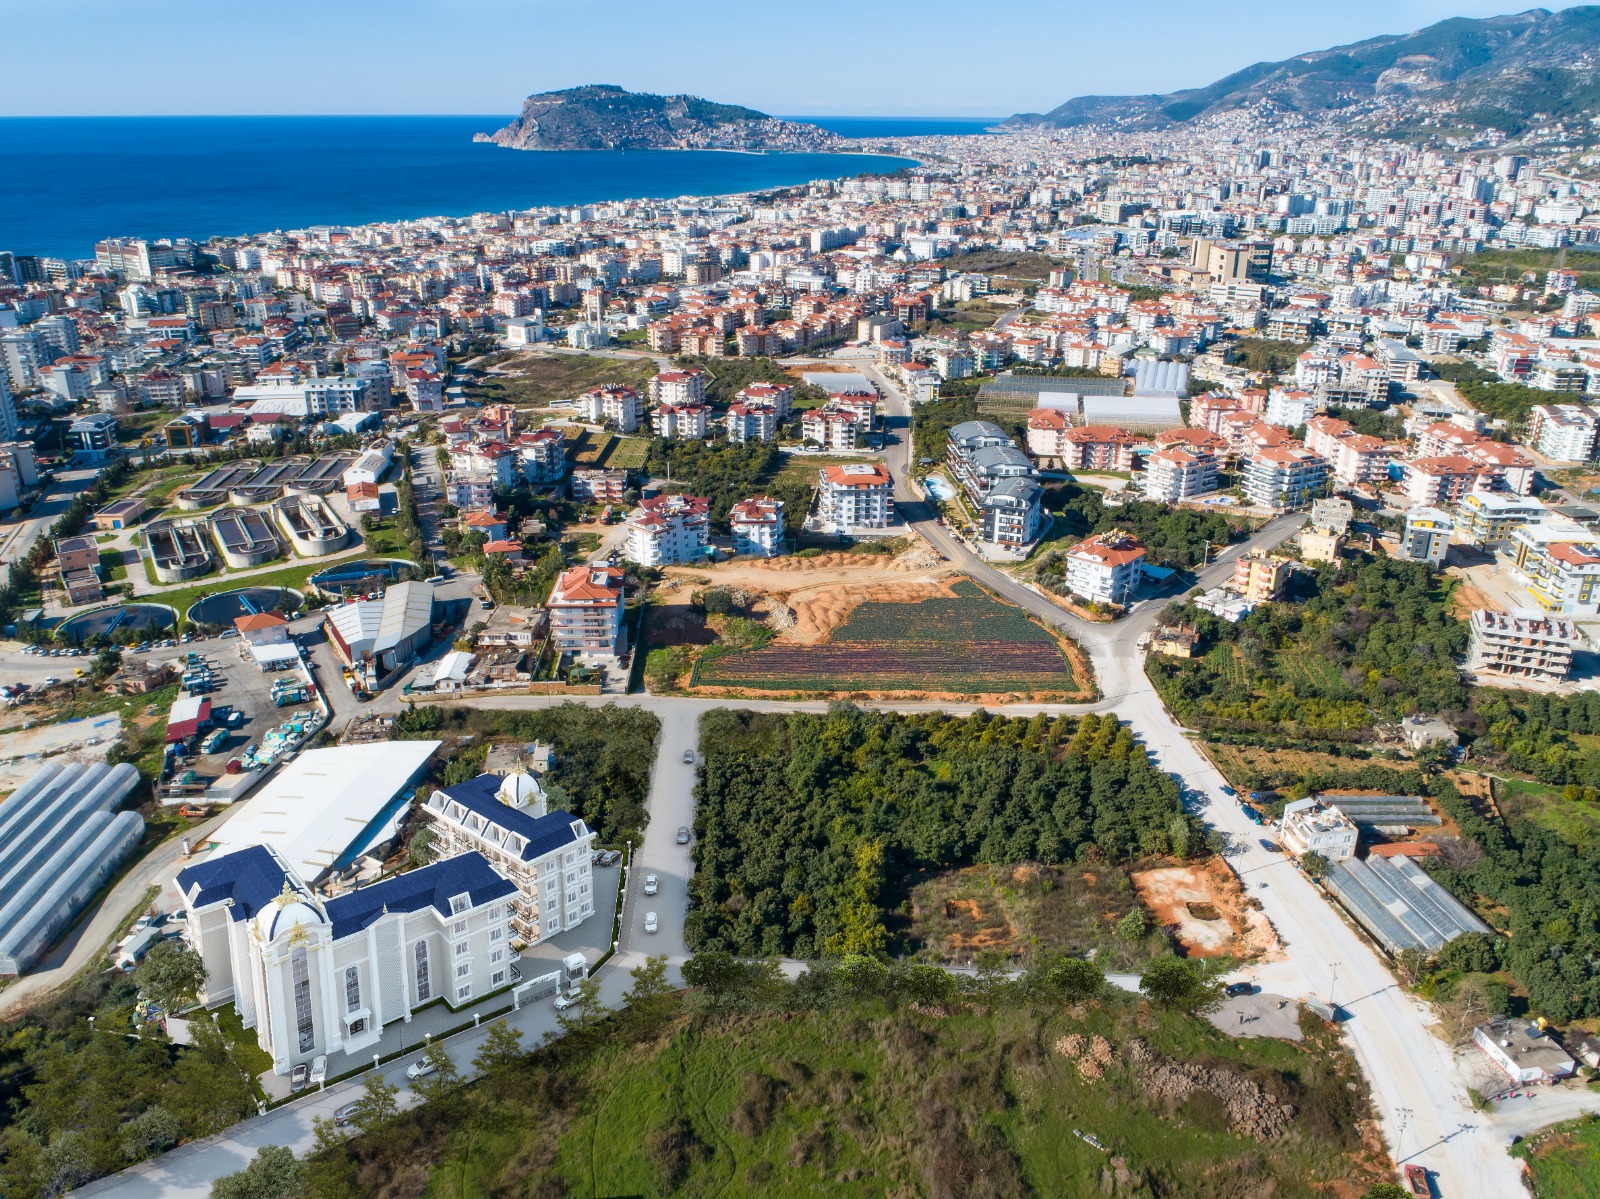 property for sale in alanya